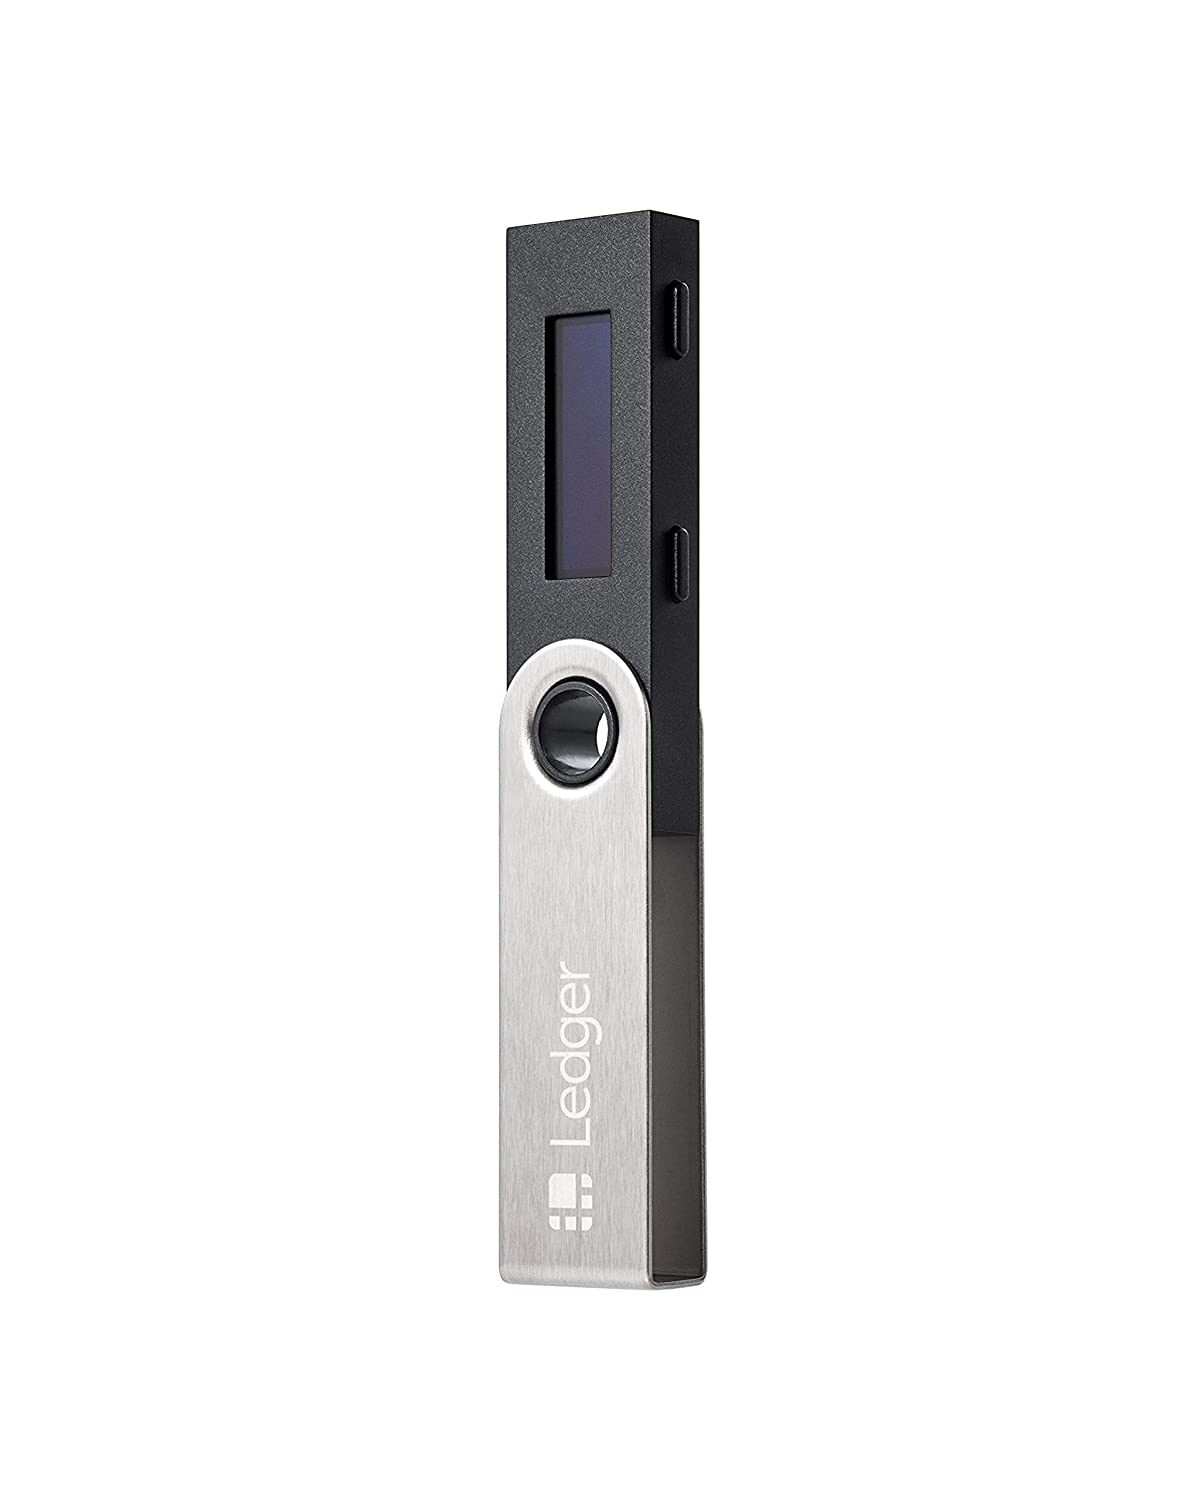 Ledger Live Download And Get A Digital Wallet For All Your Trades